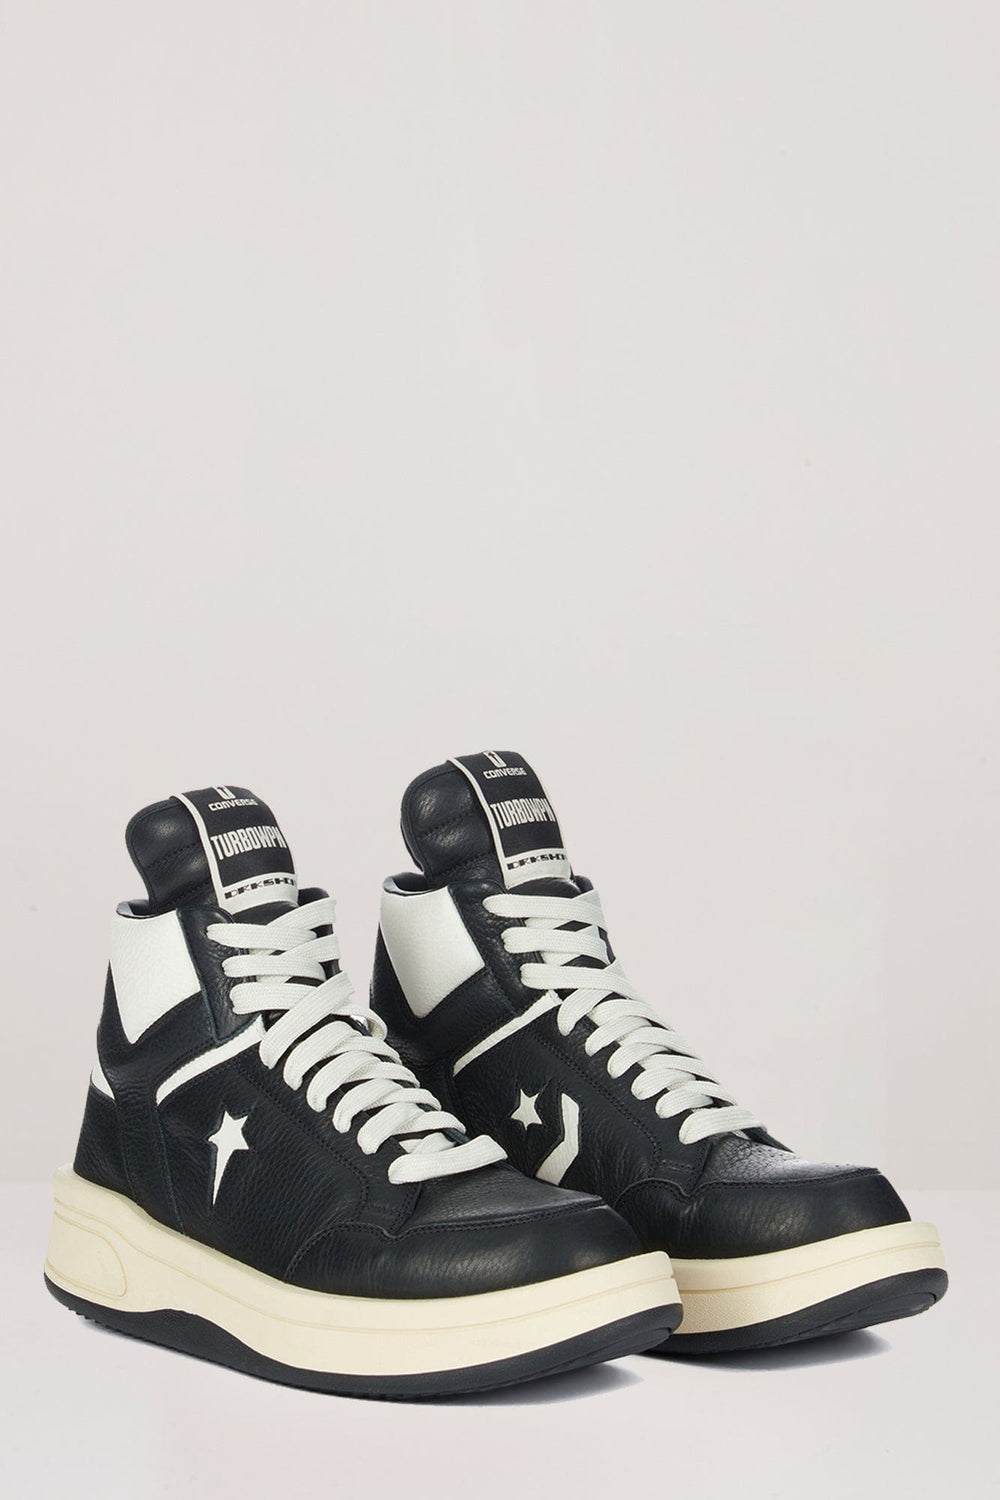 Rick Owens DRKSHDW X CONVERSE Turbowpn in Black/Natural – Antidote Fashion  and Lifestyle